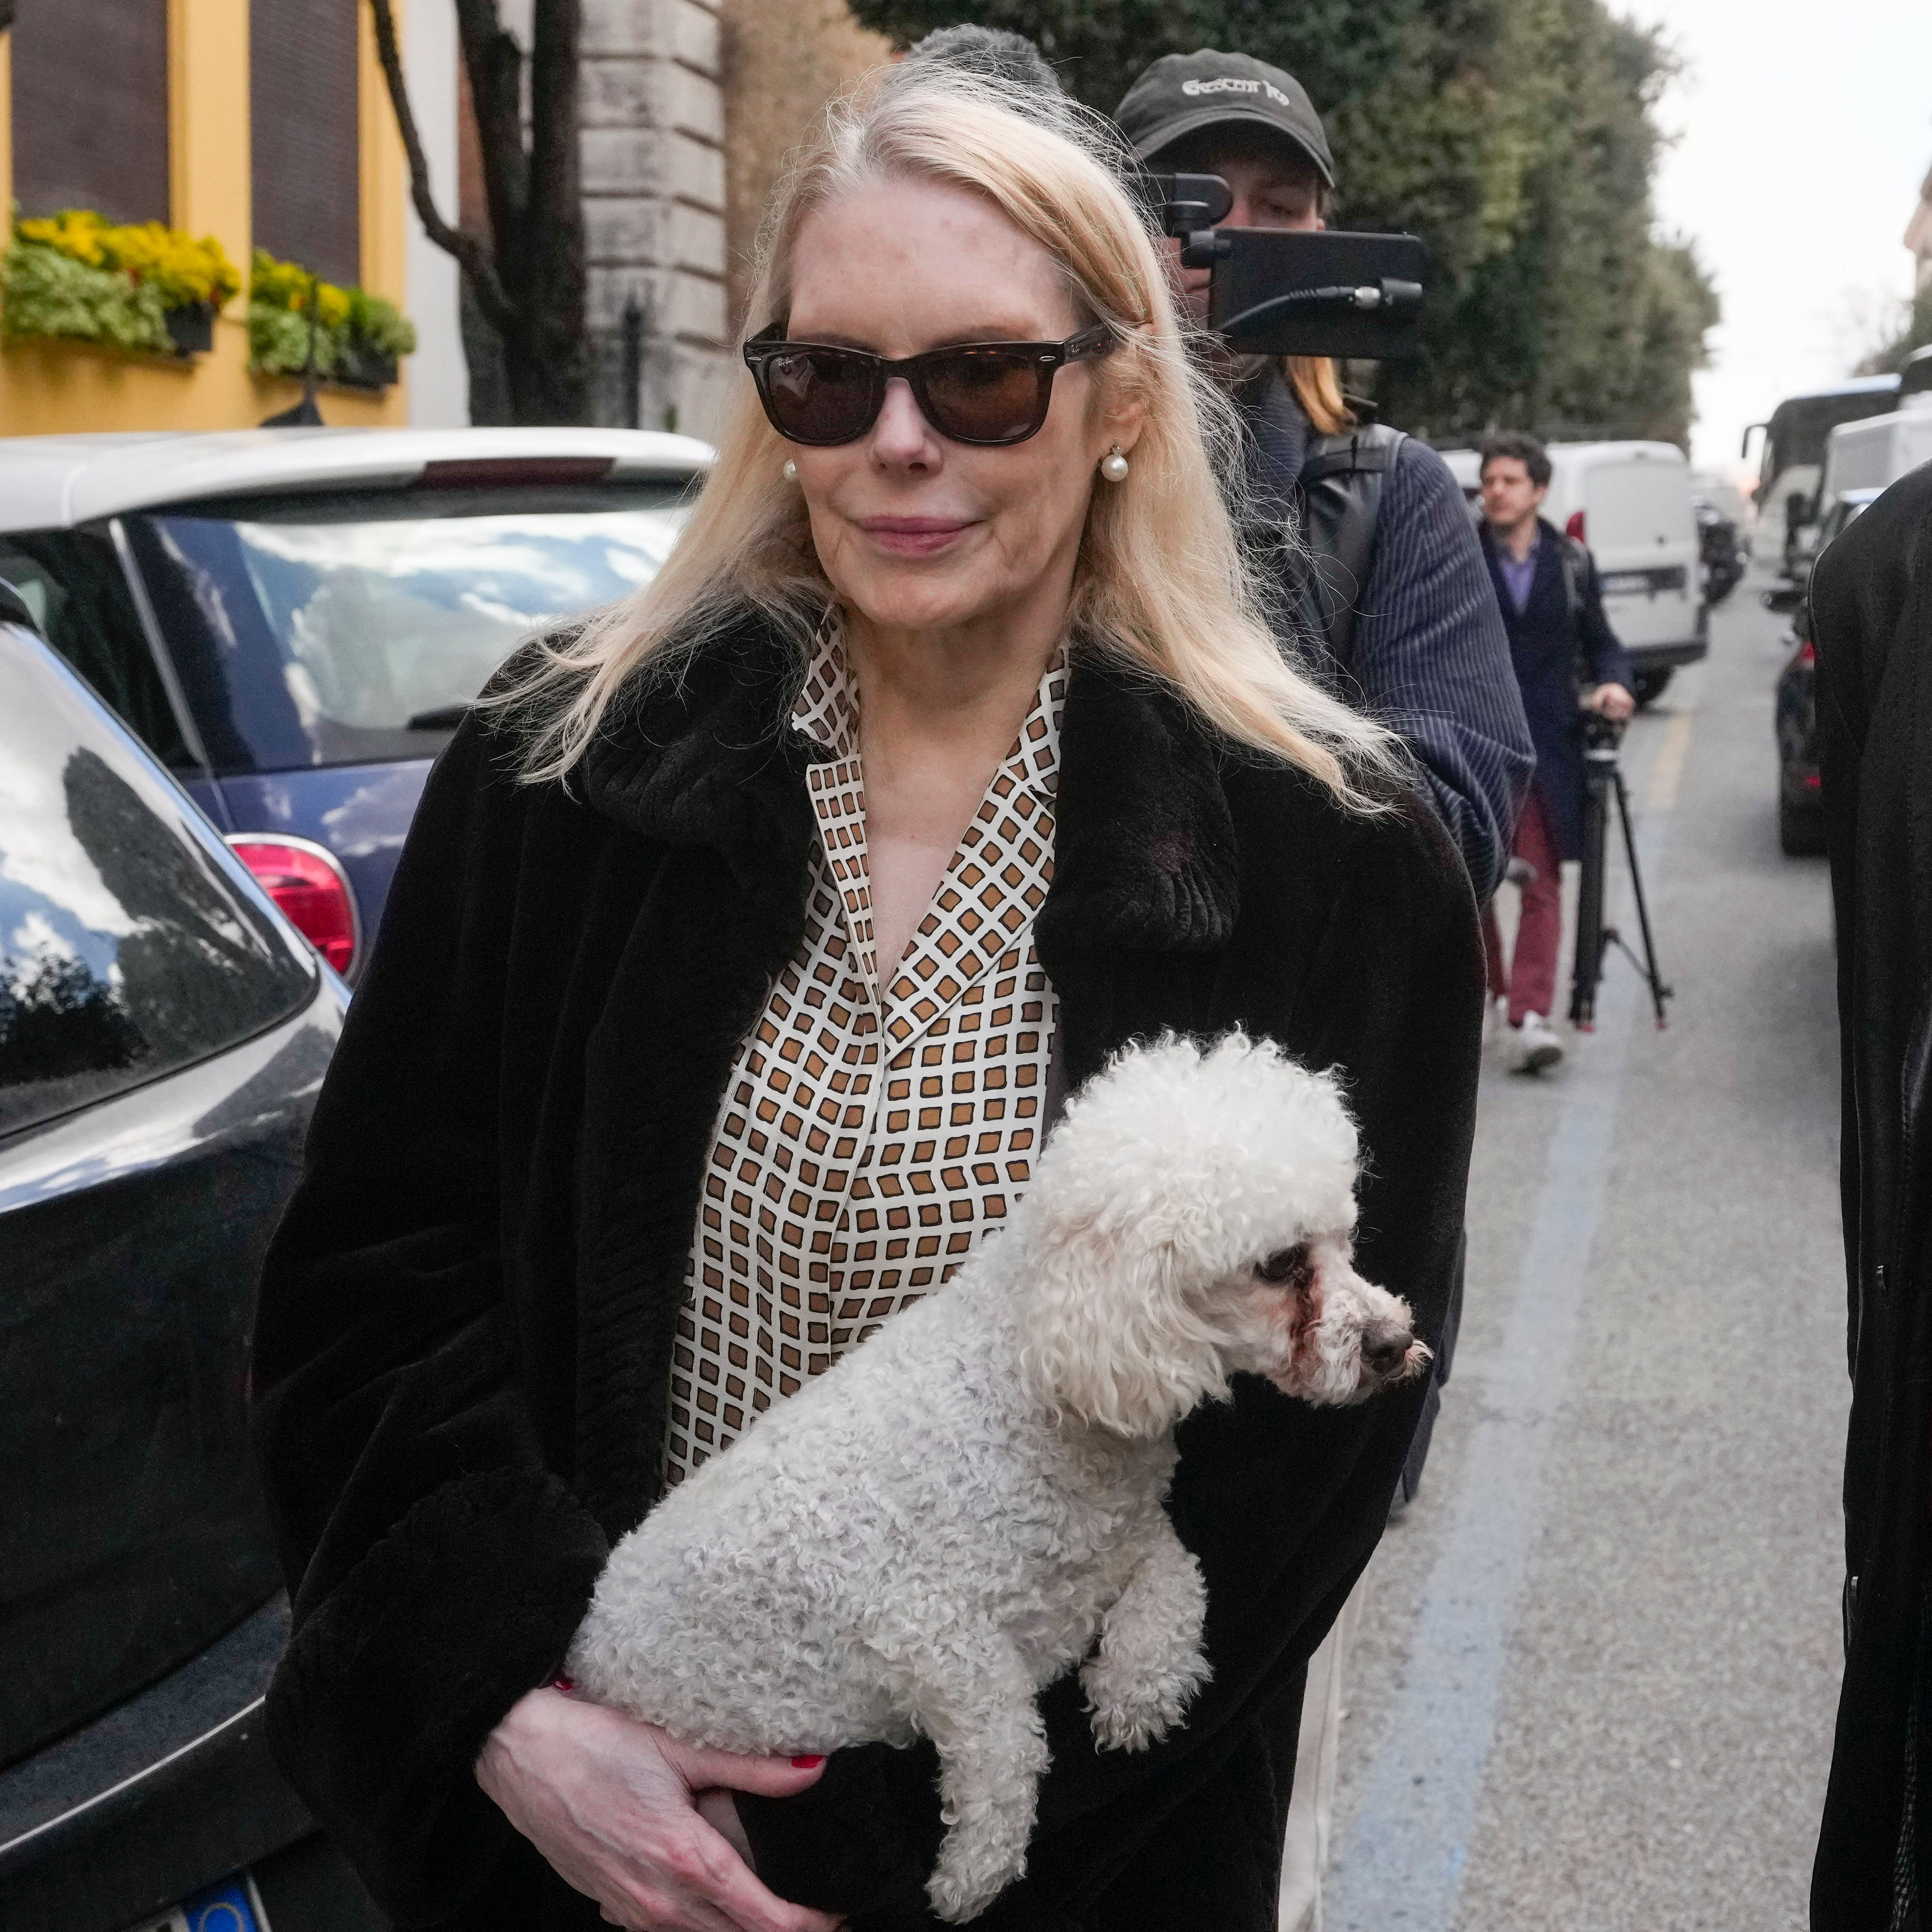 Texas-born Princess Rita Boncompagni Ludovisi, born Rita Jenrette Carpenter and last wife of late Prince Nicolo Boncompagni Ludovisi, leaves her residence, The Casino dell'Aurora, also known as Villa Ludovisi, during the execution of an eviction order, in Rome, Thursday, April 20, 2023. The villa contains the only known ceiling painted by Caravaggio and Princess Ludovisi is facing a court-ordered eviction Thursday, in the latest chapter in an inheritance dispute with the heirs of one of Rome's aristocratic families. (AP   Photo/Andrew Medichini)